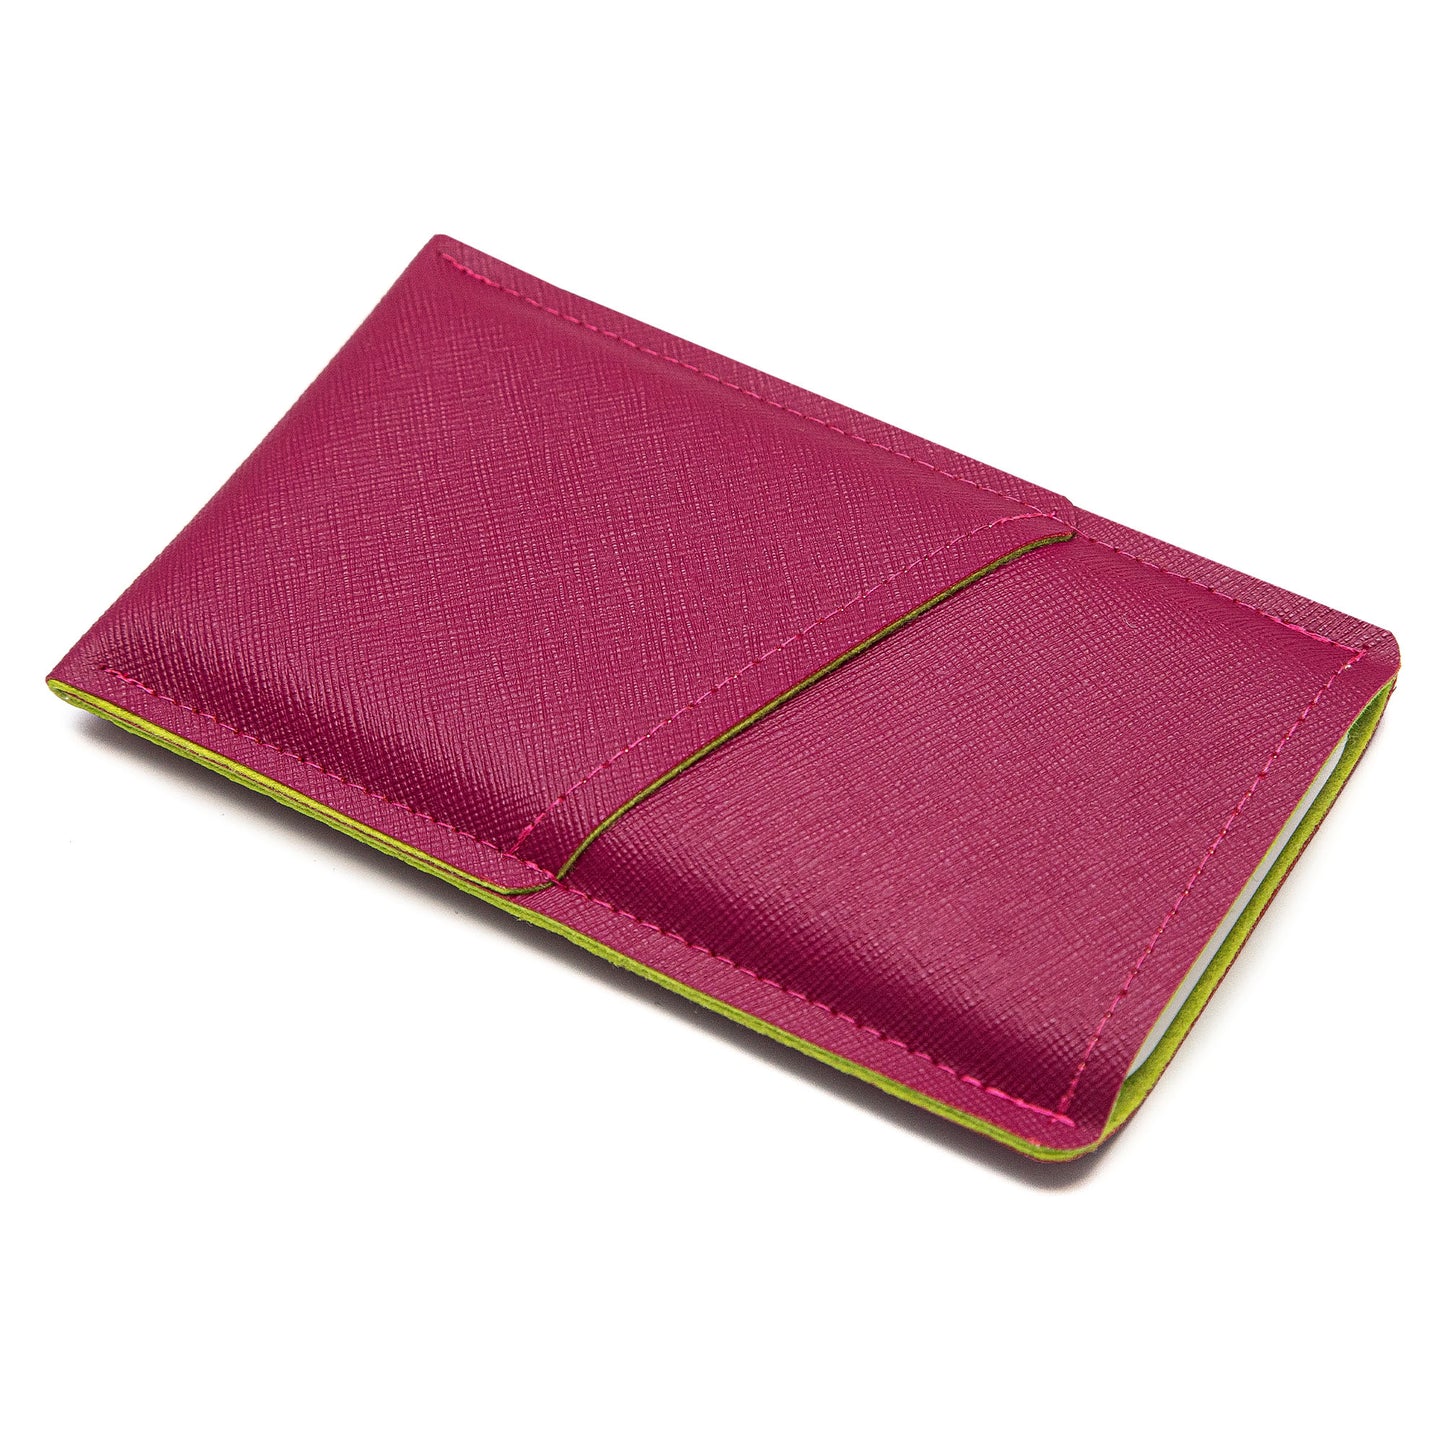 Modern Faux Leather iPhone Sleeve with Card Pocket – Burgundy Red